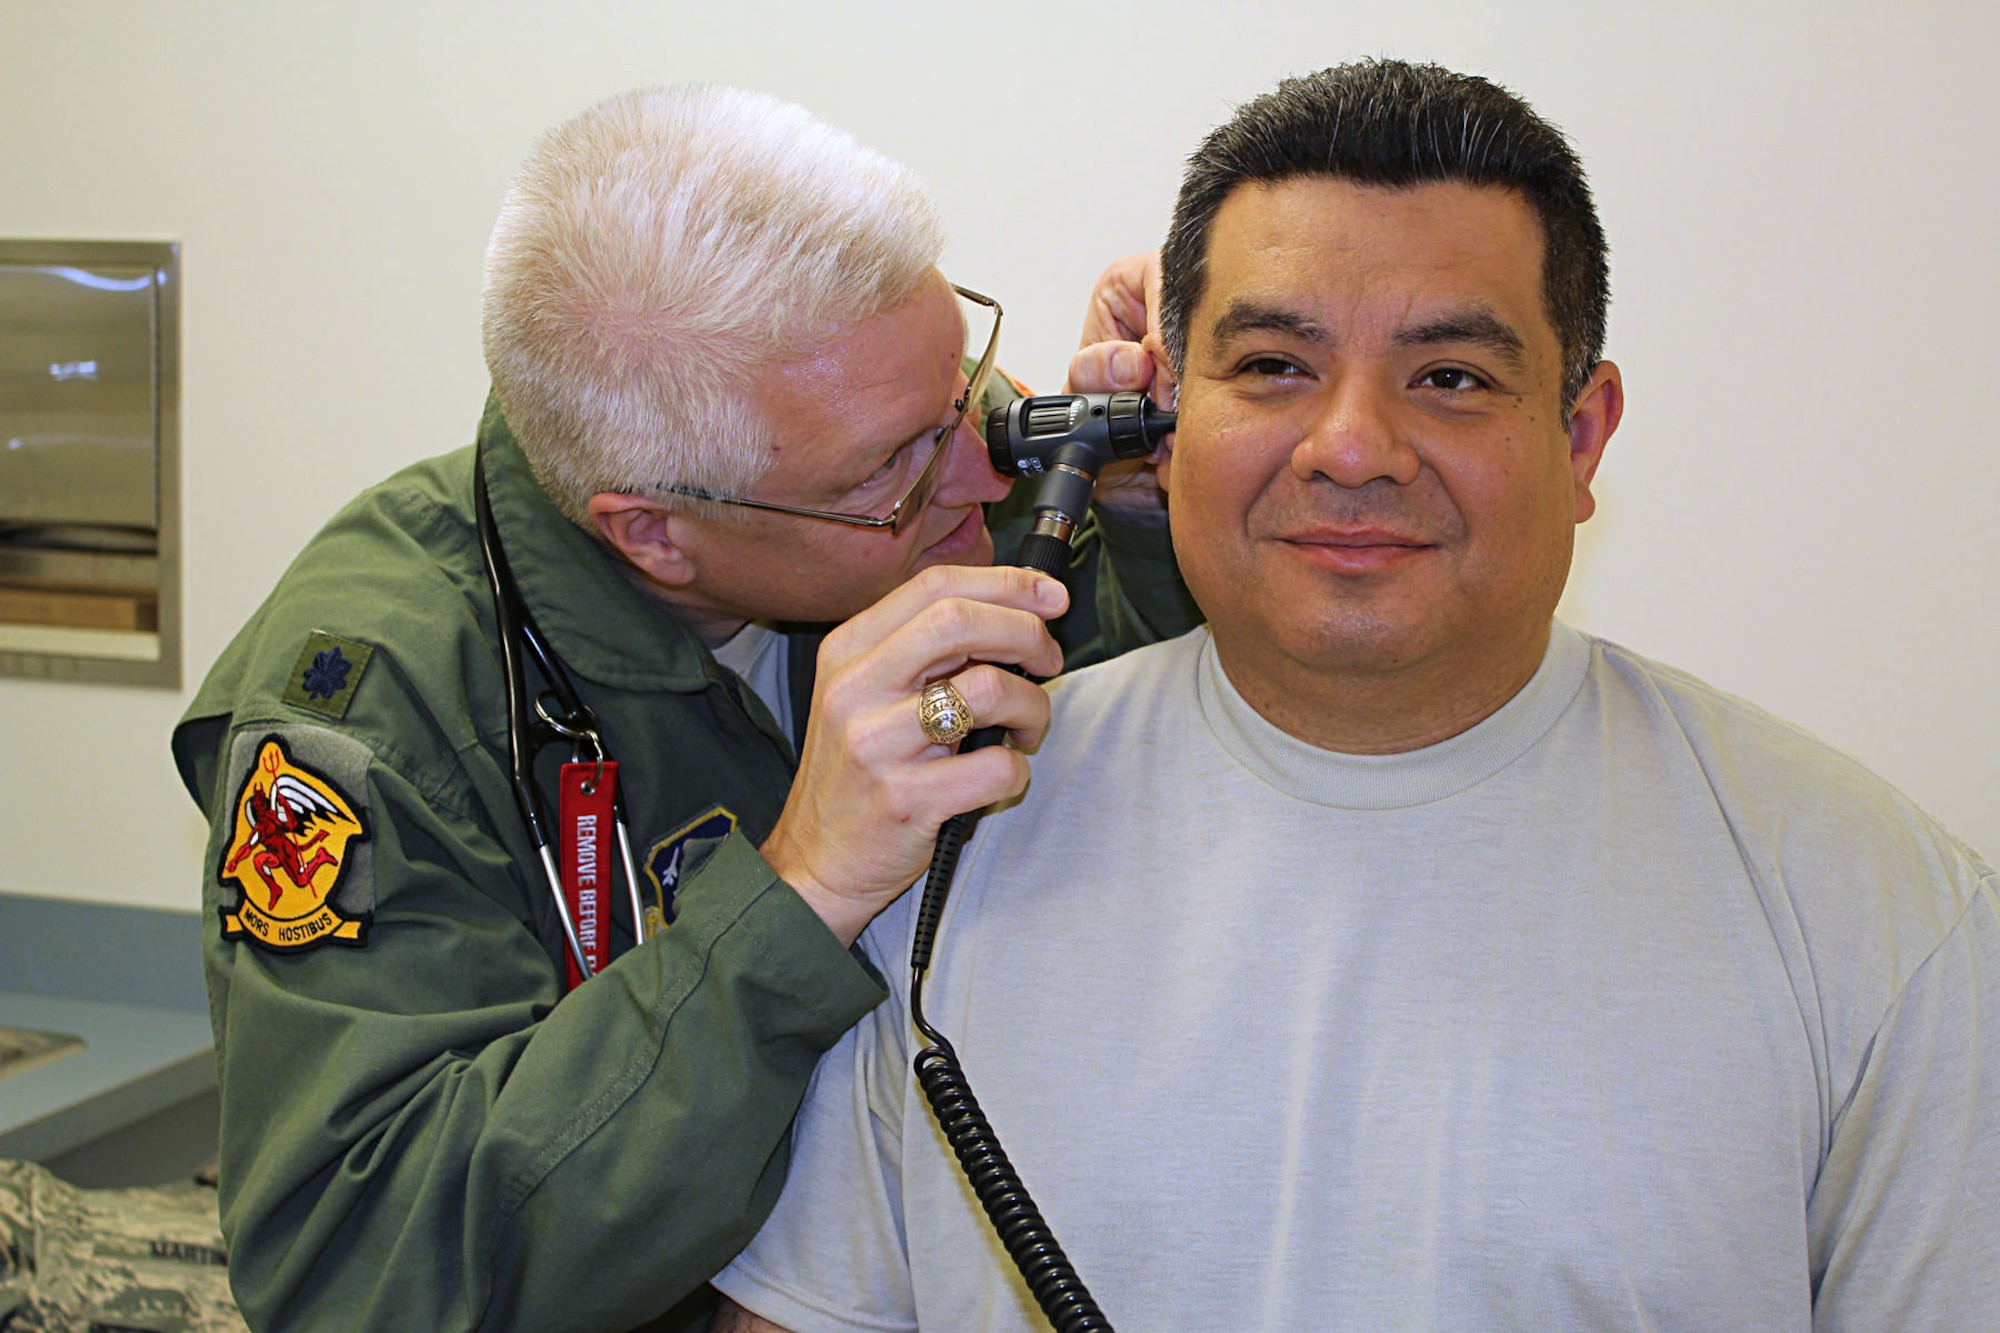 Lt. Col. (Dr.) Brian Schroeder examines Staff Sgt. Ernest Martinez at Selfridge Air National Guard Base, Mich., May 17, 2014. Schroeder is a physician with the 127th Medical Group, which is tasked with ensuring the medical readiness of the Airmen assigned to the 127th Wing, Michigan Air National Guard, at Selfridge. Martinez is a member of the 127th Logistics Readiness Squadron at Selfridge. (U.S. Air National Guard photo by Technical Sgt. Dan Heaton / Released)